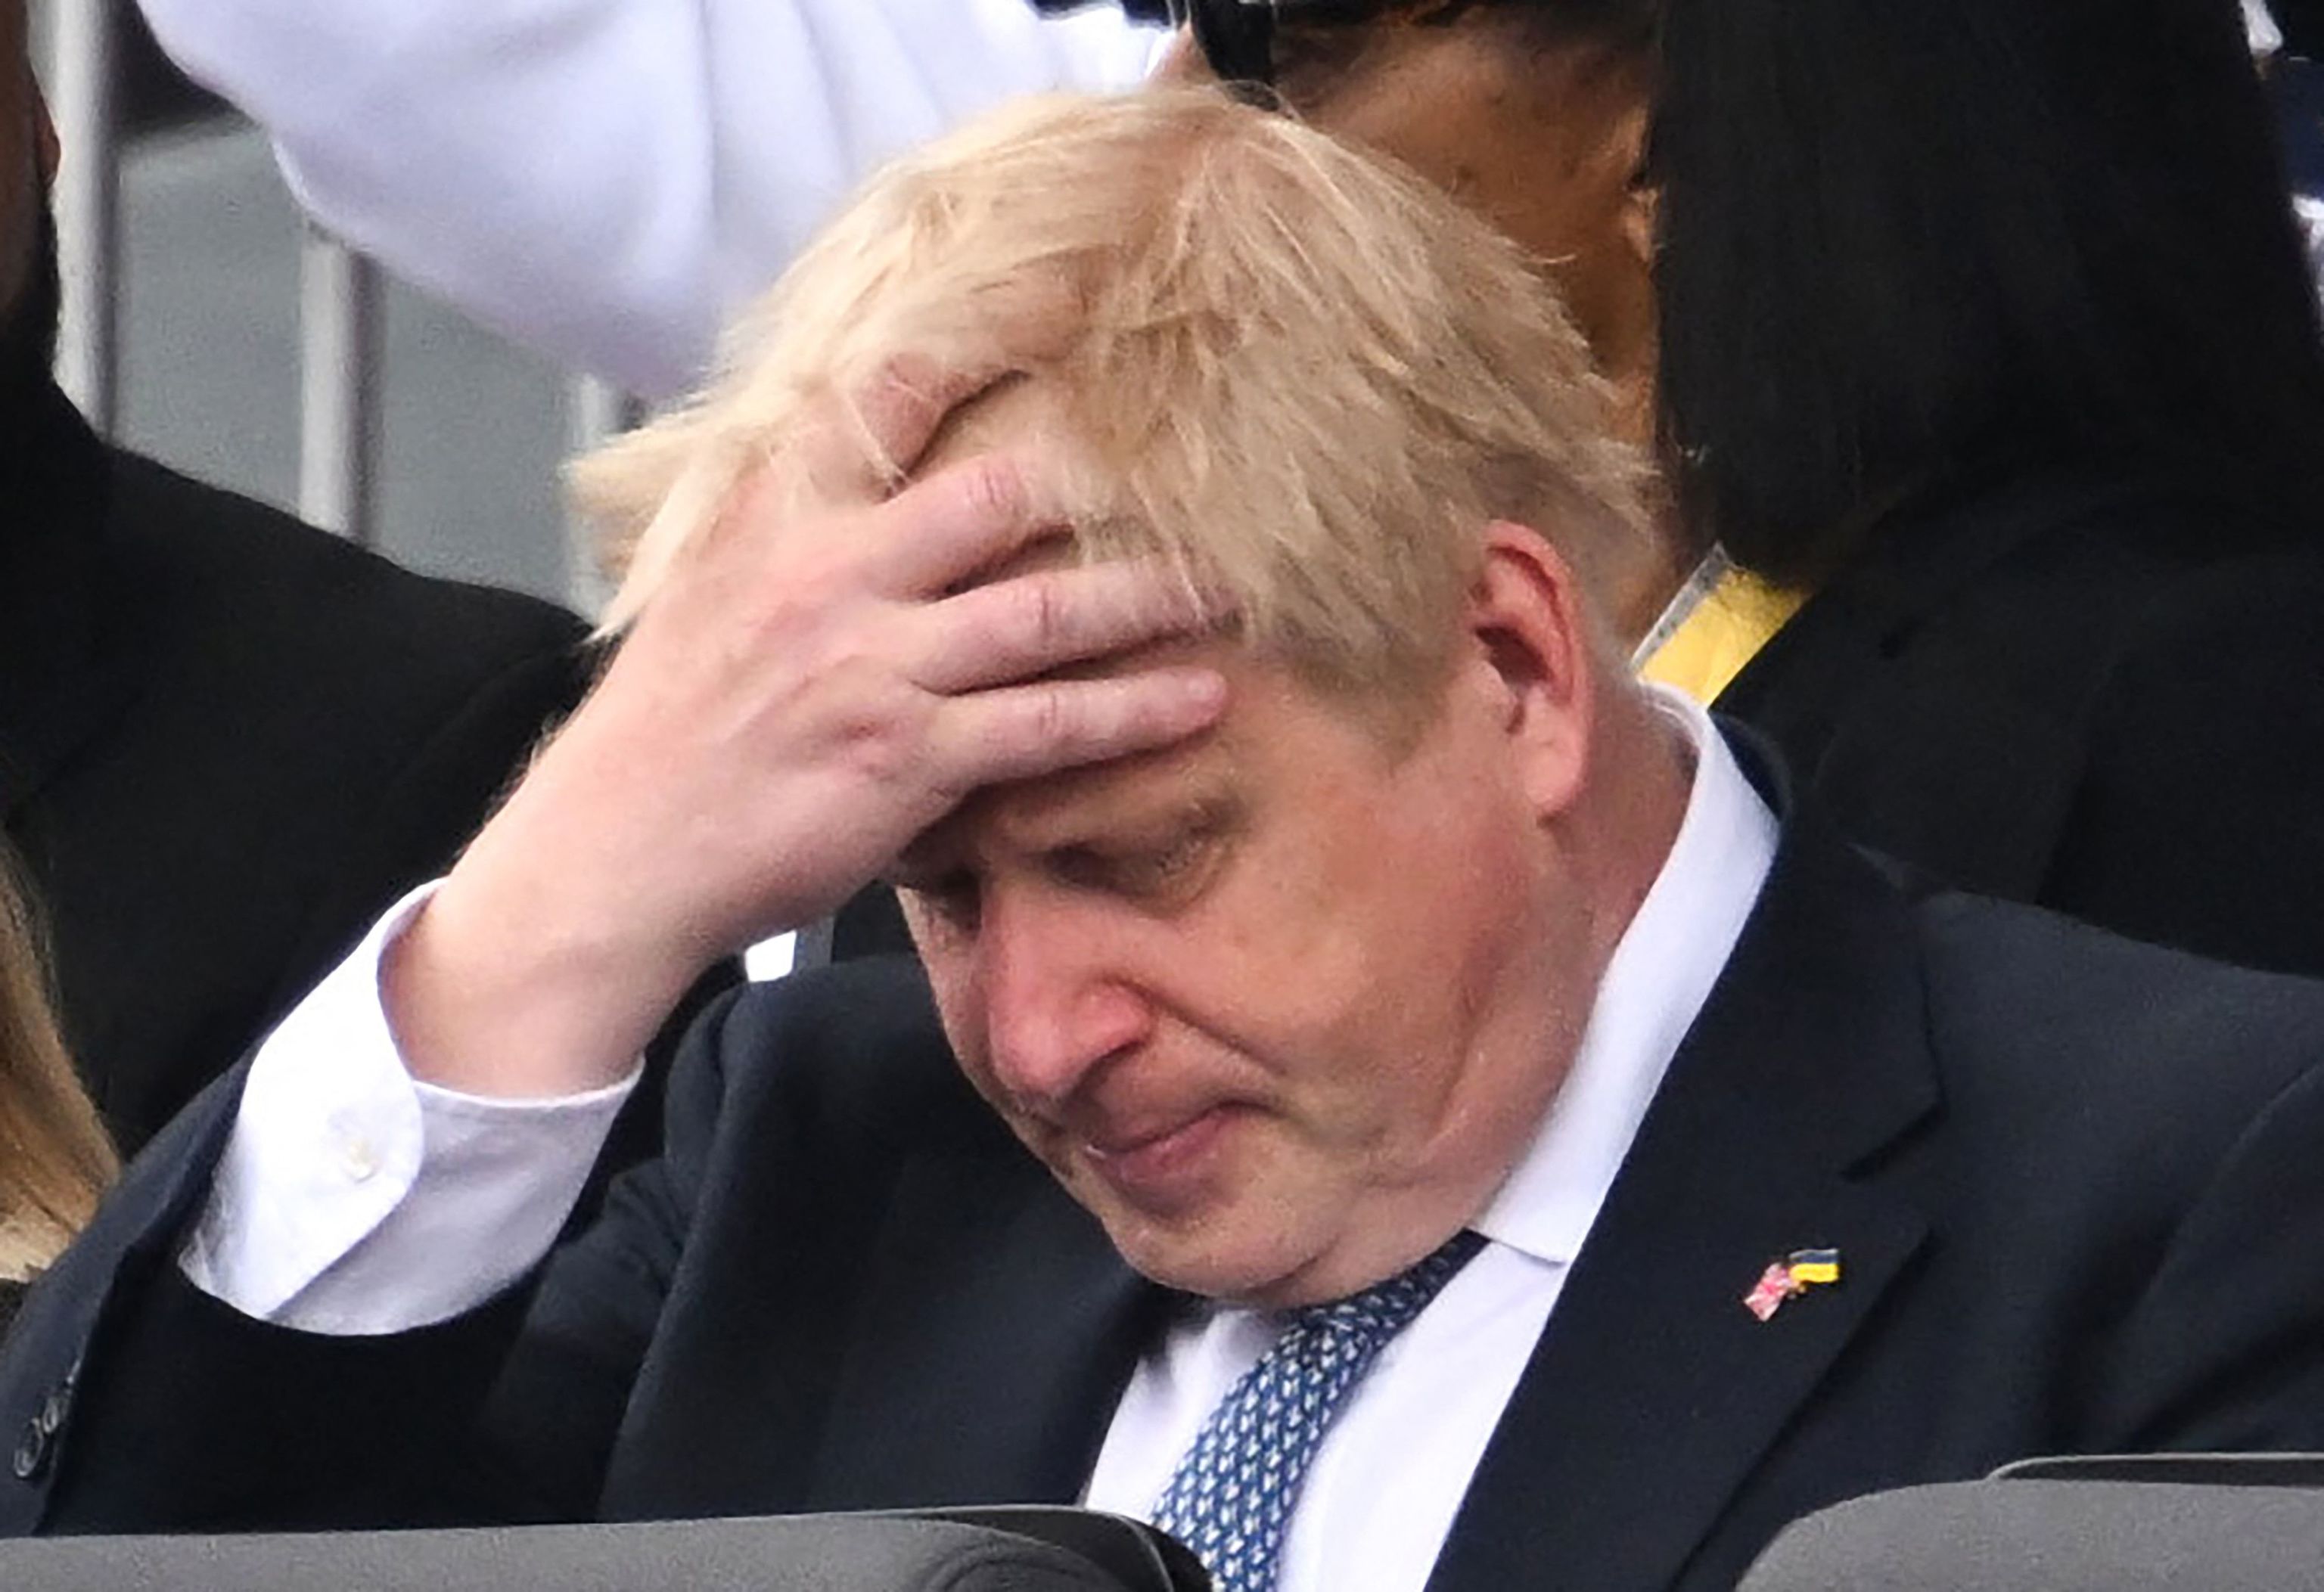 Boris Johnson with a worried expression during Jubilee.